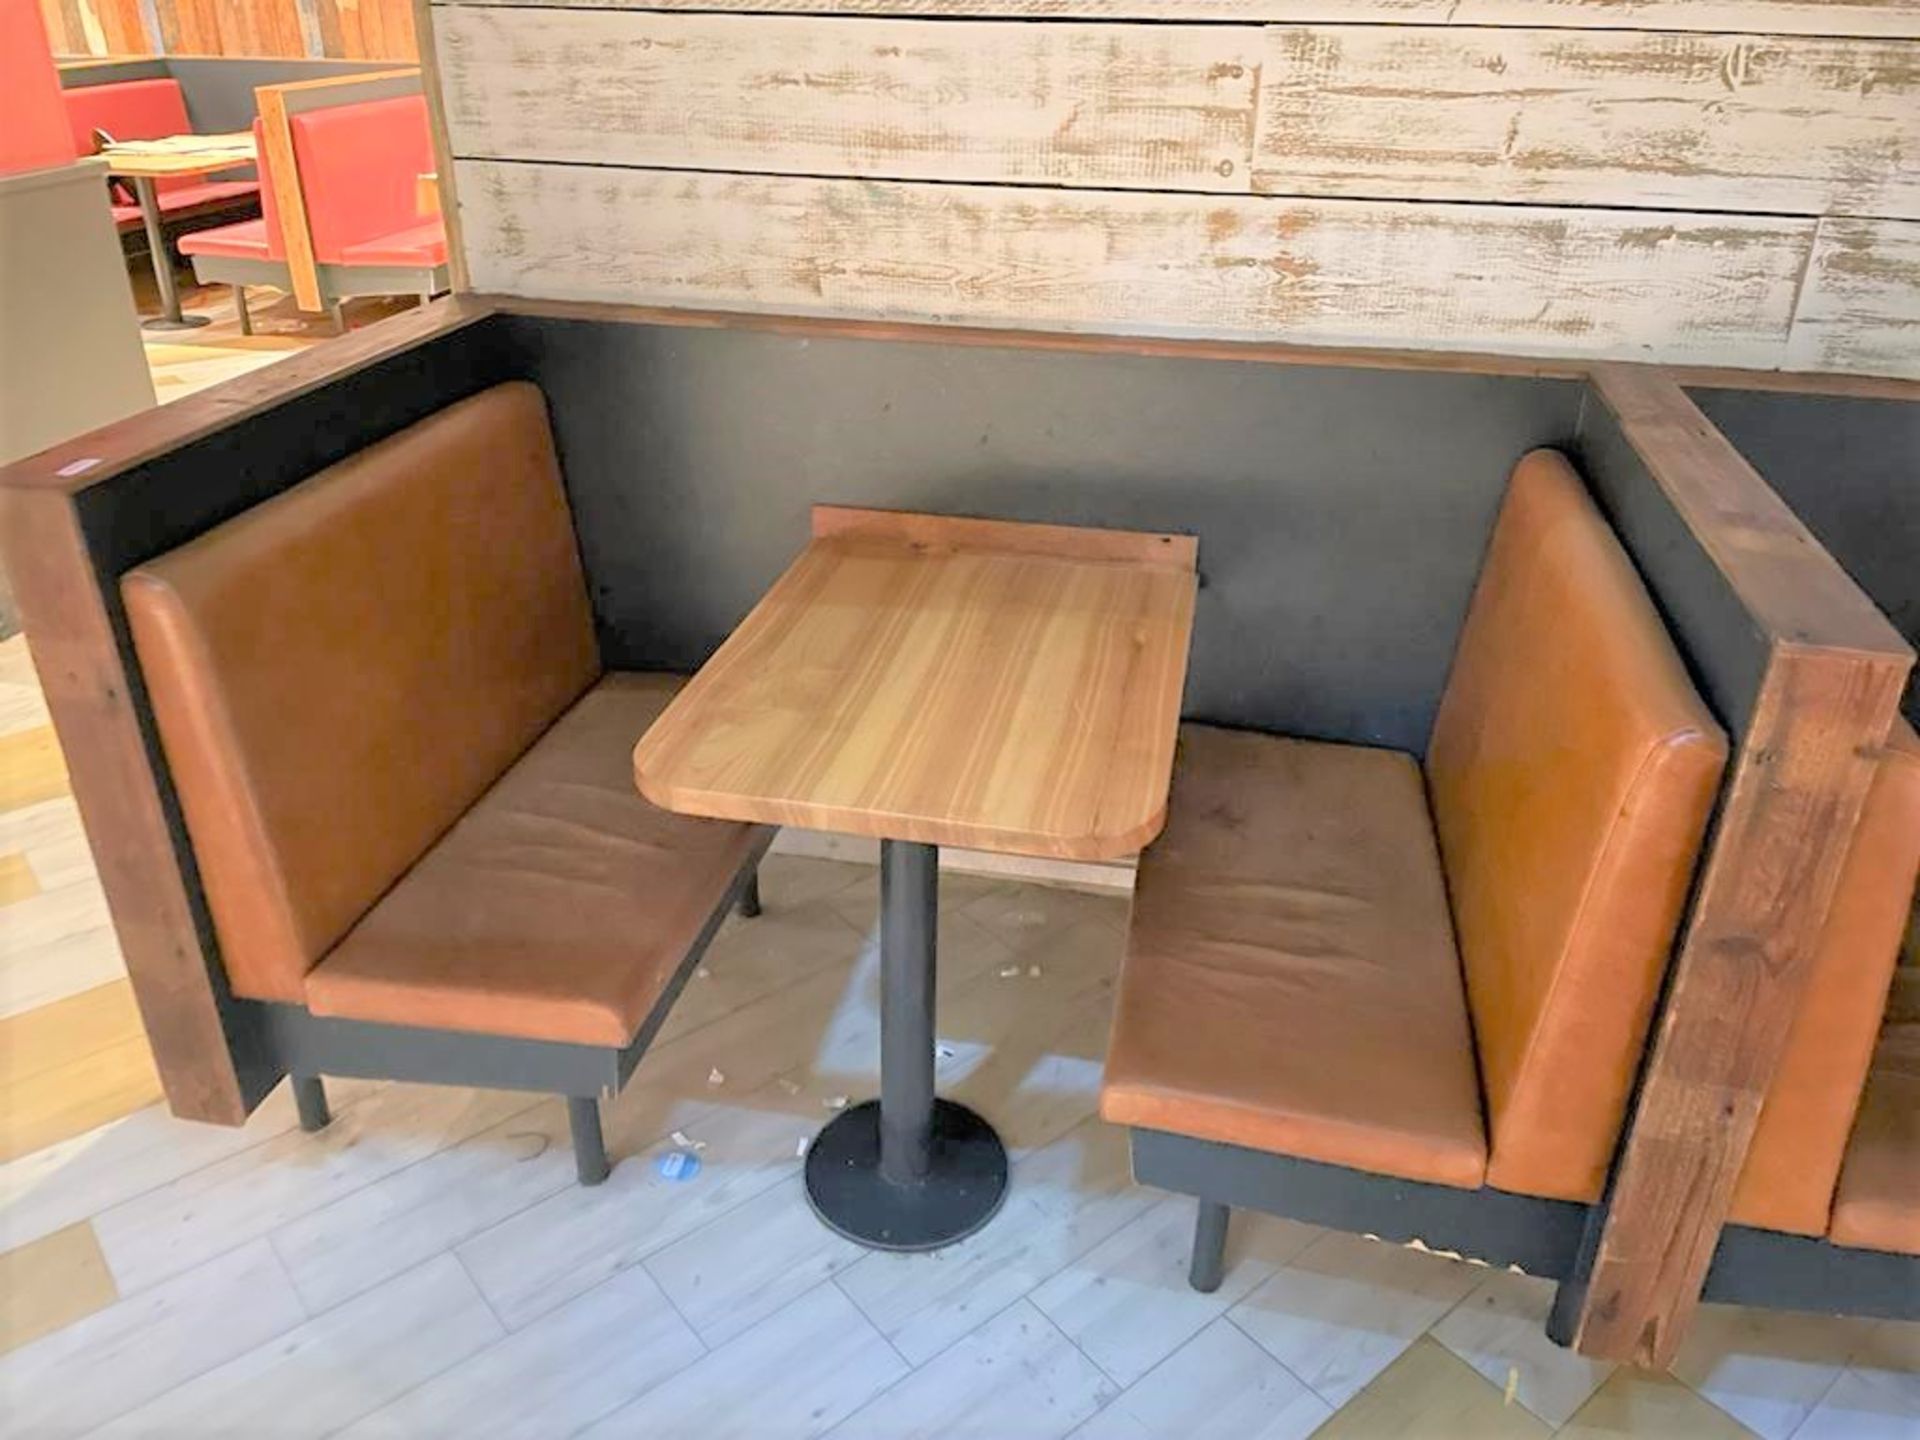 4 x Restaurant Leather Seating Booth Benches With 2 x Rectangular Wall Mounted Oak Tables - - Image 3 of 4